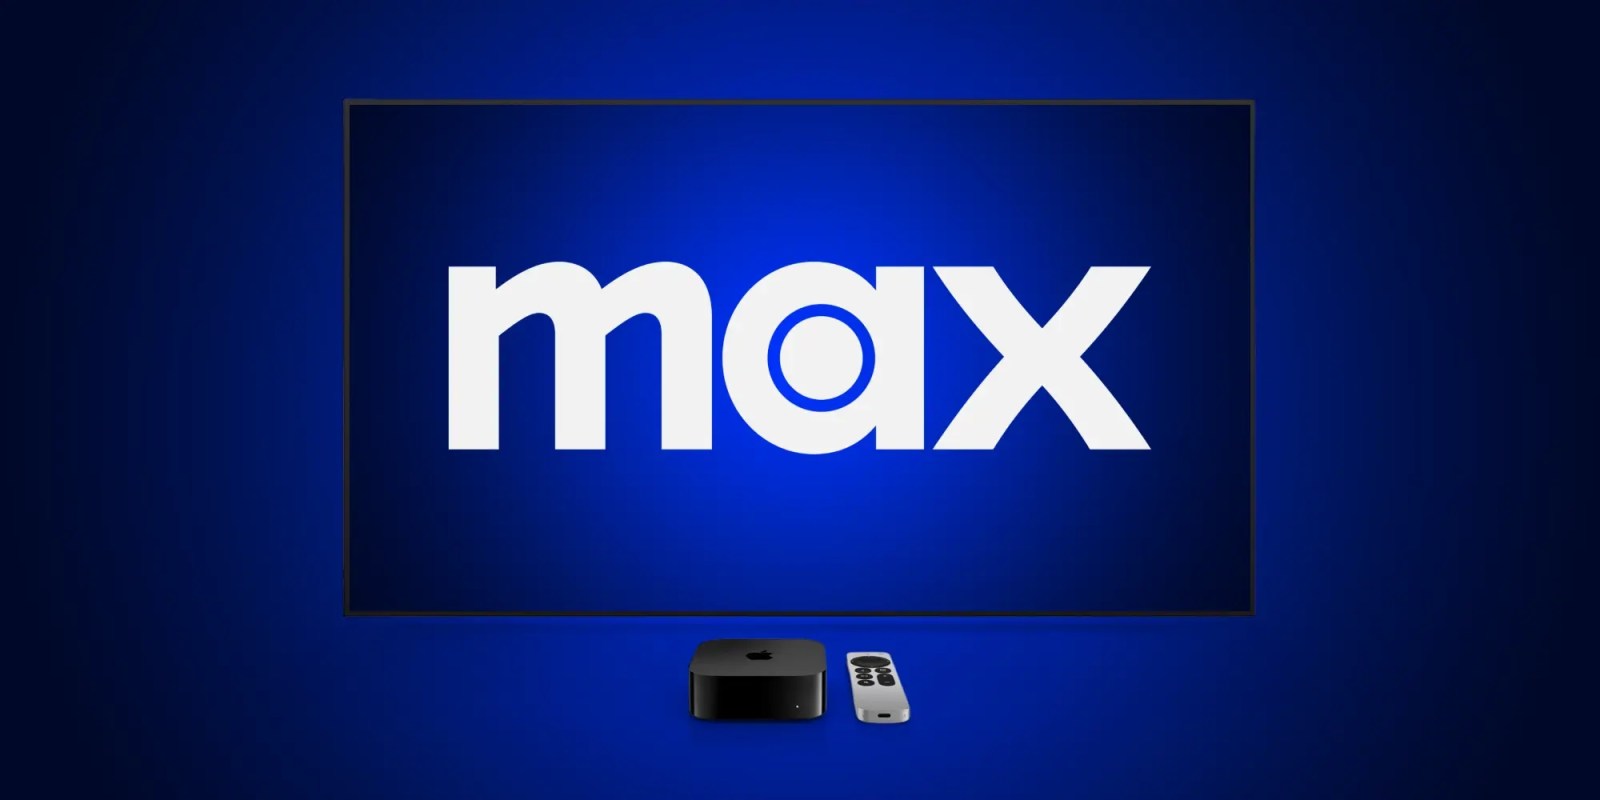 Hbo max to become ‘max in latin american countries next.webp